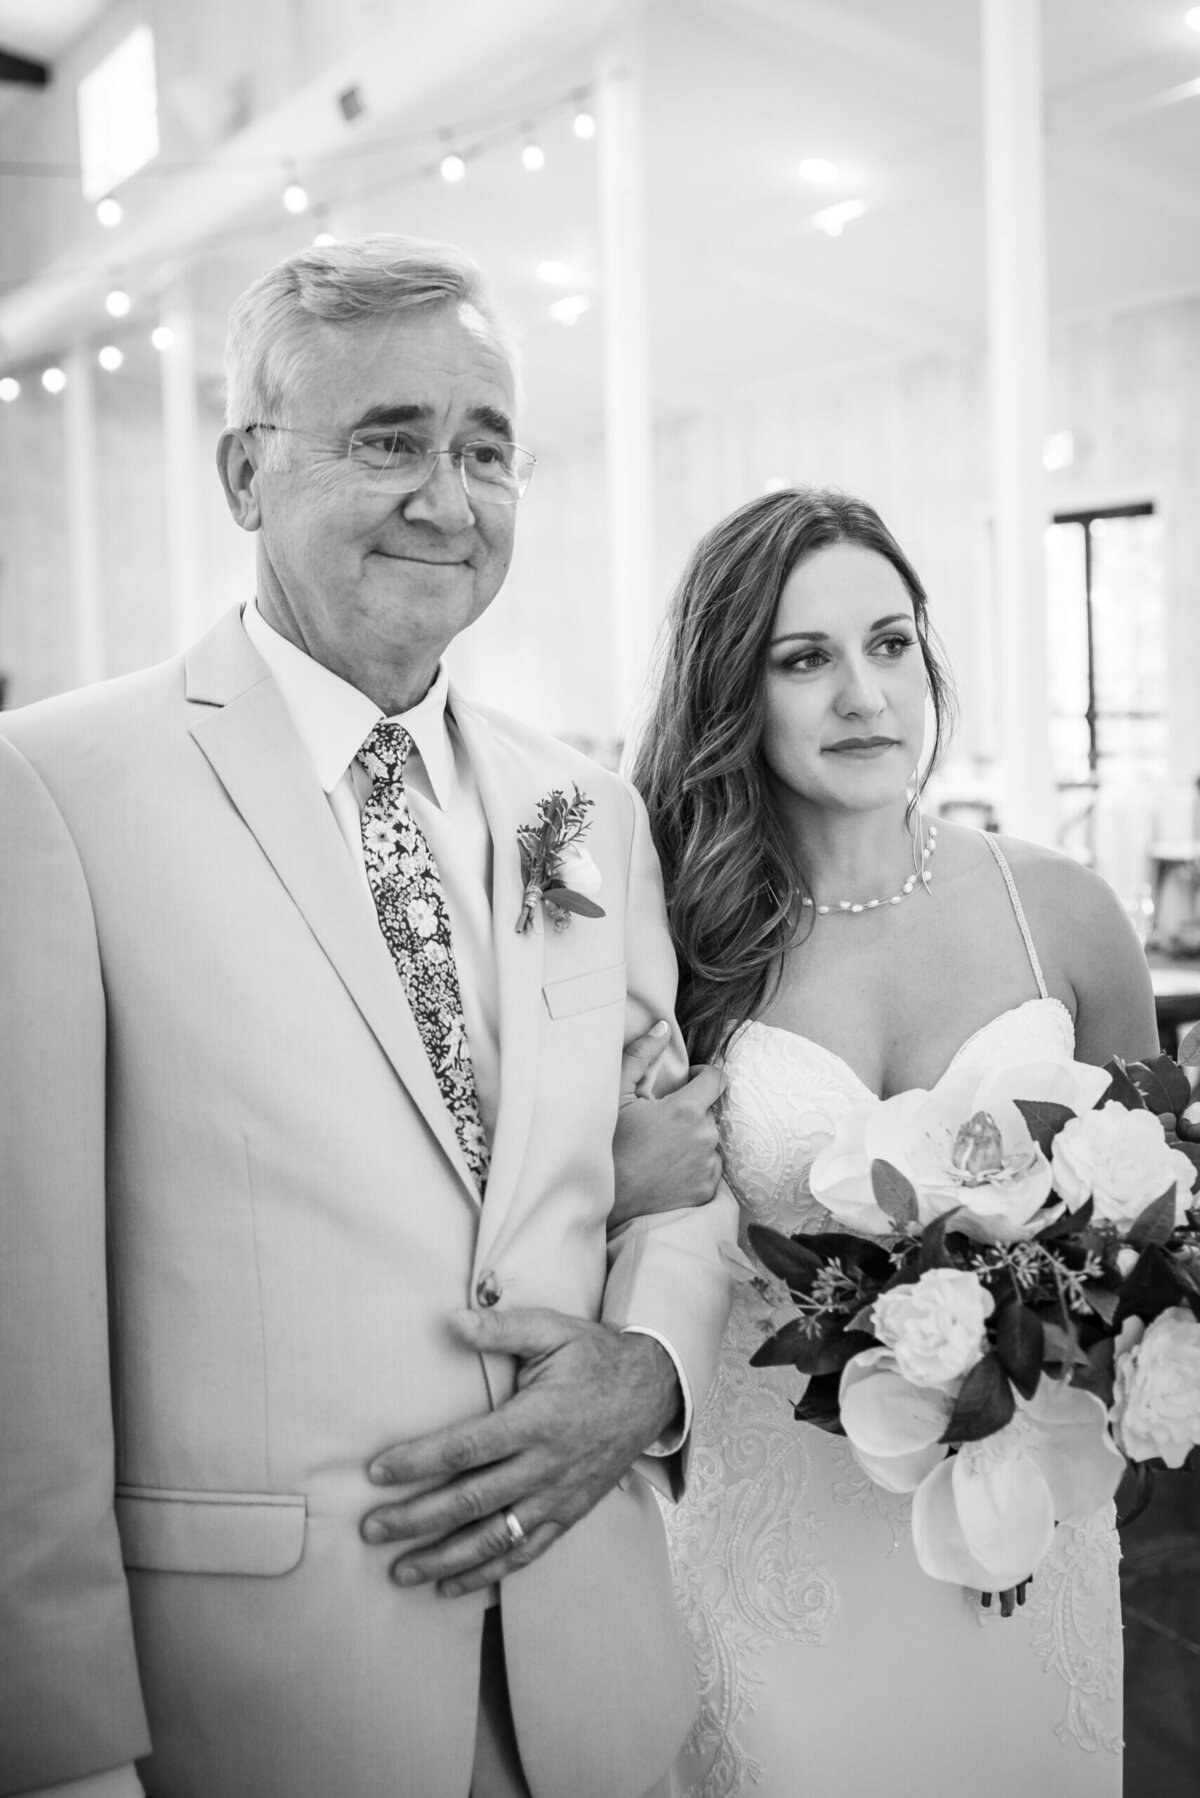 A sentimental candid moment of a bride arm-in-arm with her father as they get ready to walk up the aisle.